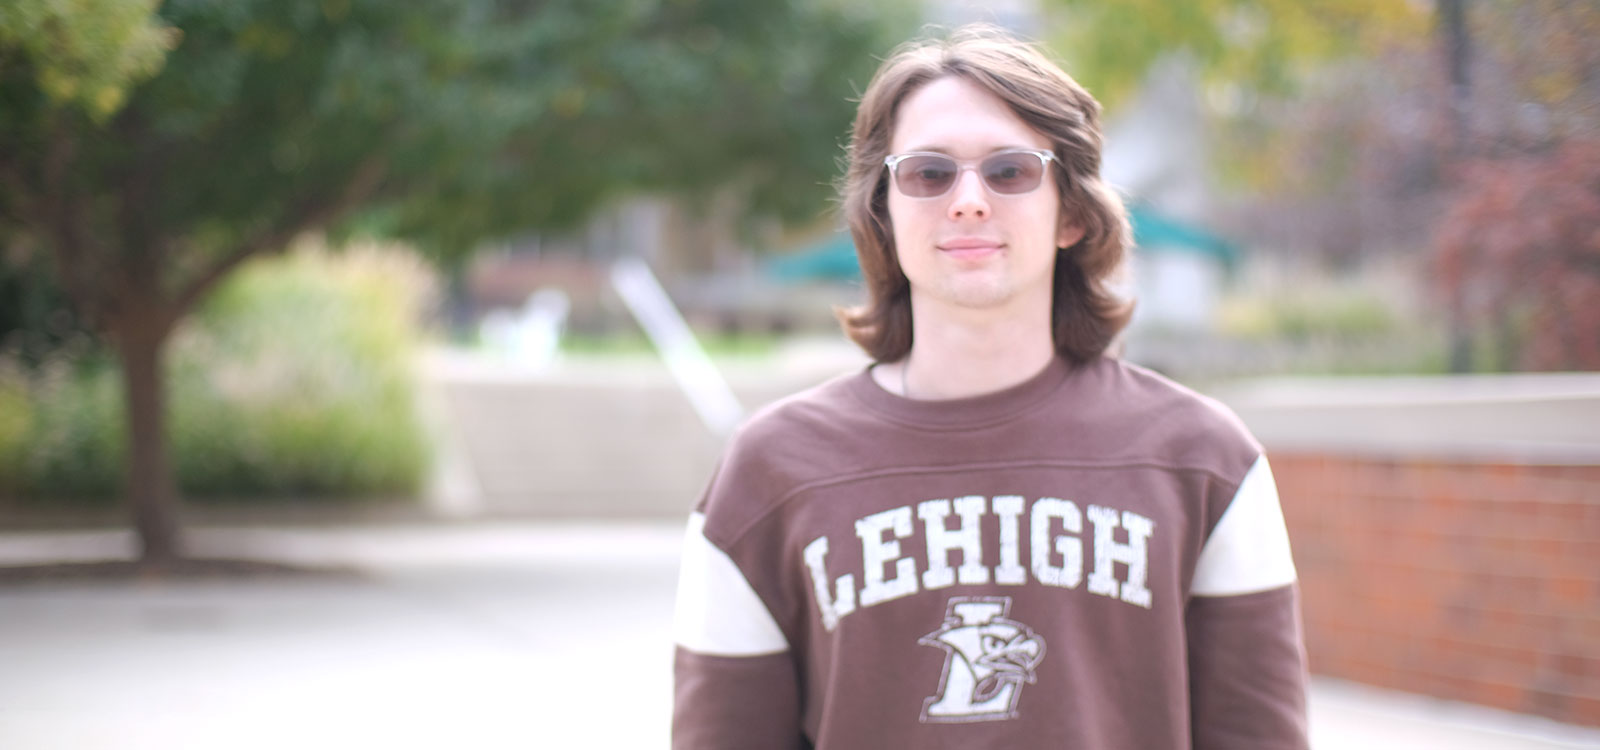 Sean Henry stands in the FML plaza in a Lehigh shirt